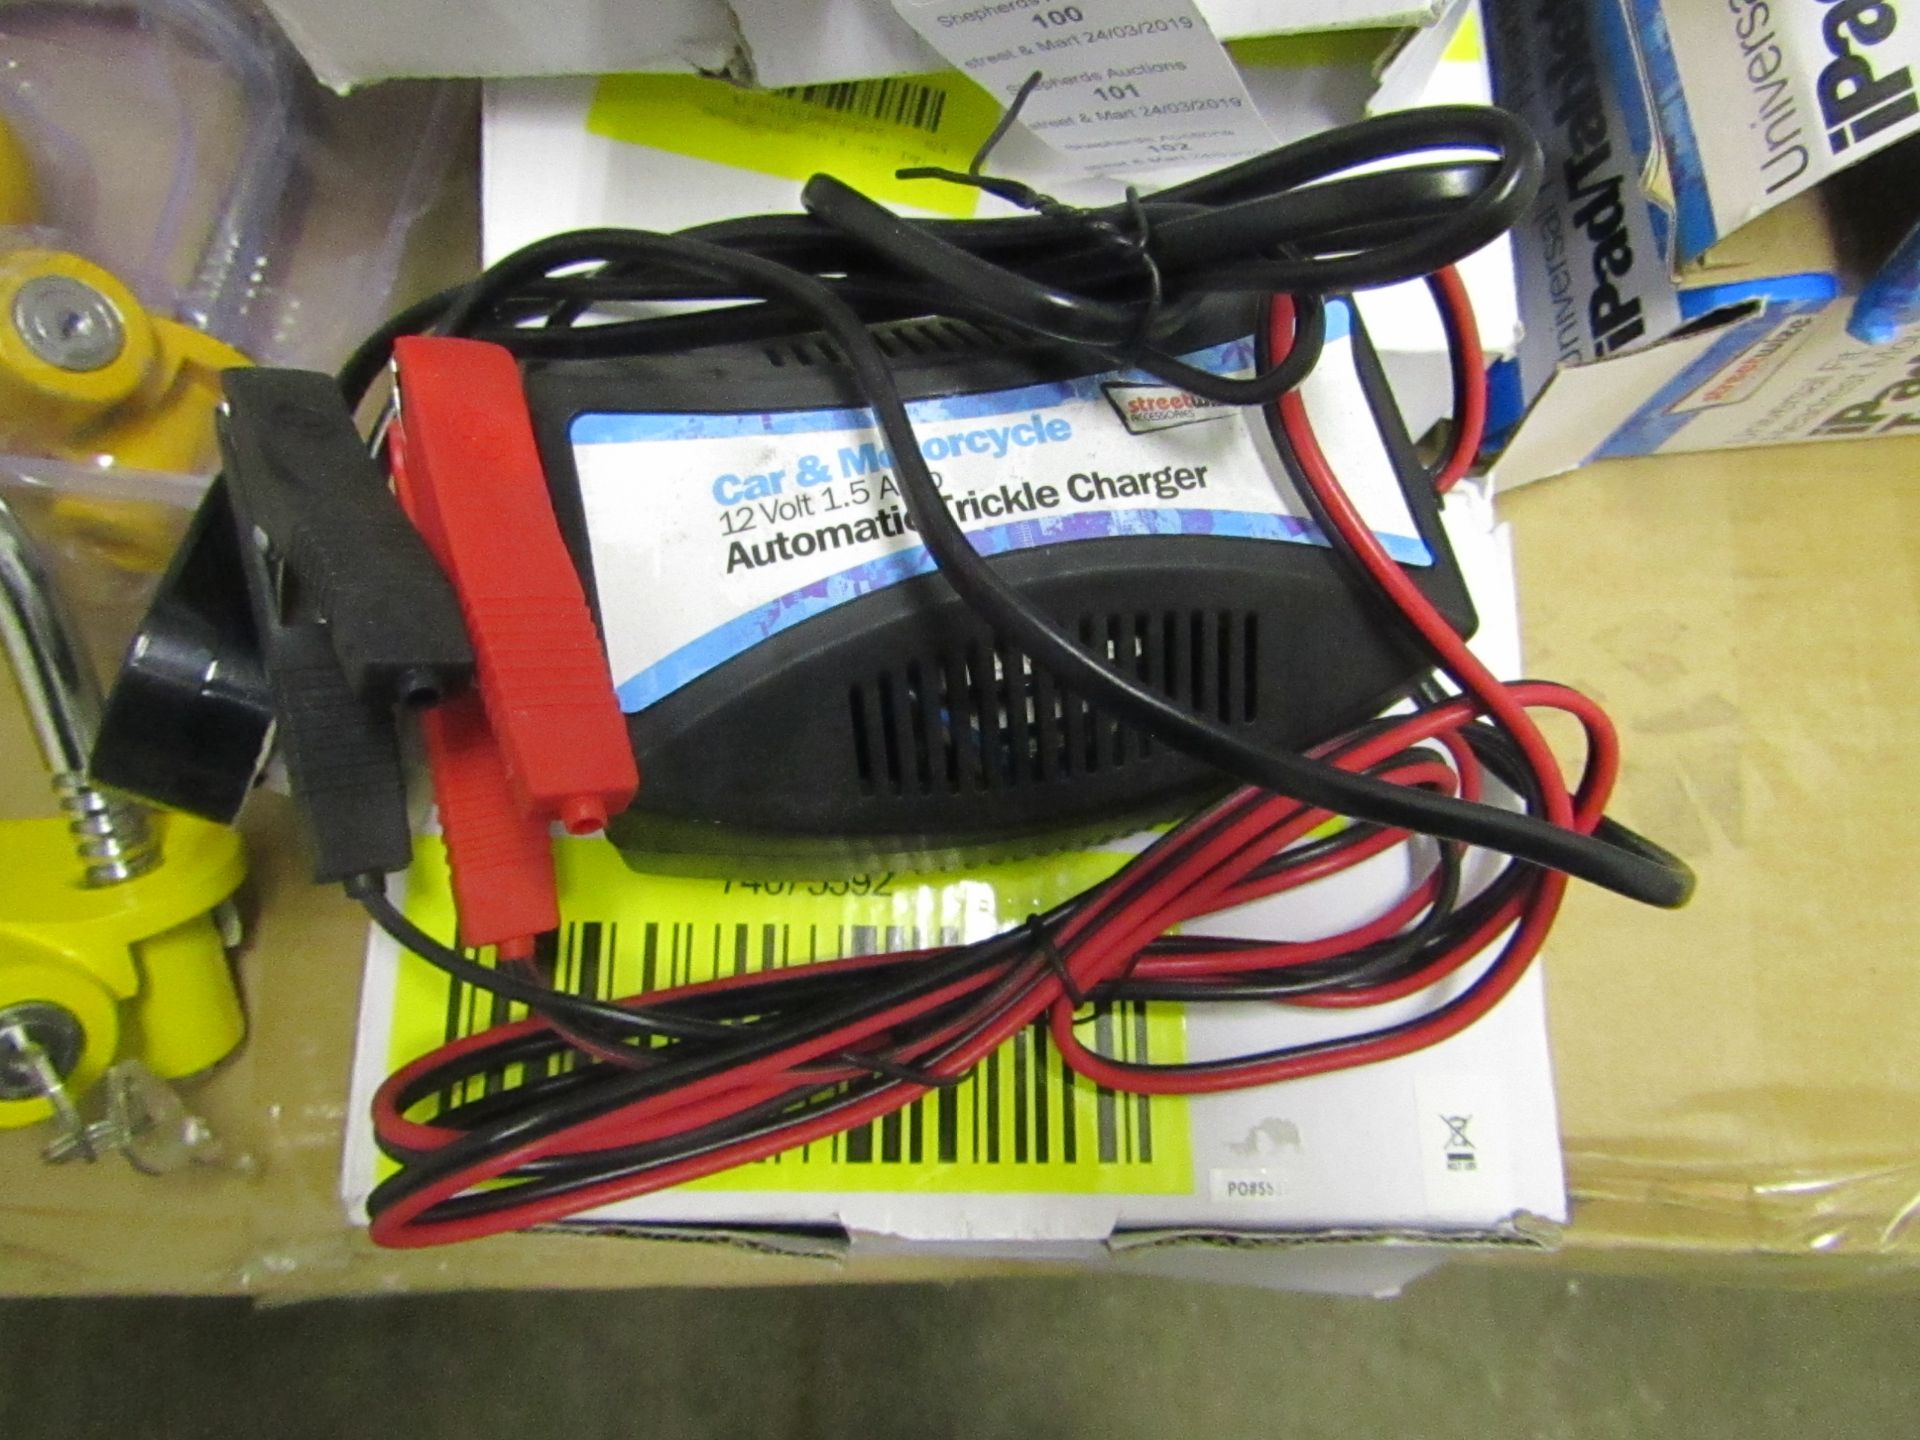 Car and Motorcycle 12v 1.5amp trickle charger, unchecked